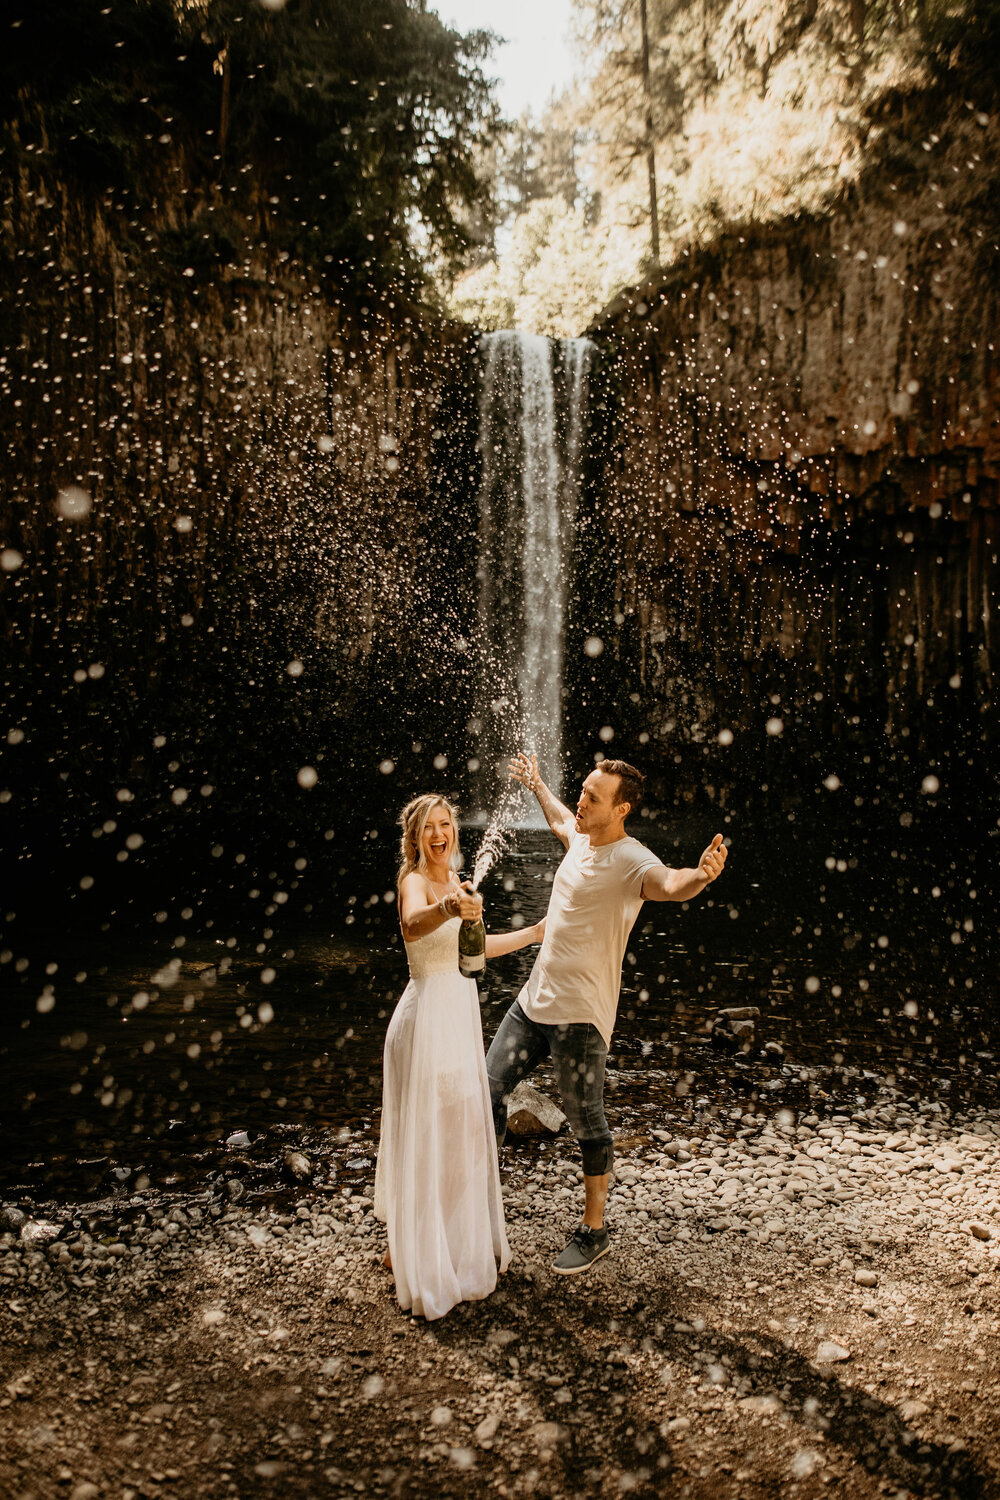 Places in the pnw that look like iceland- Locations in the US that look like iceland- Iceland elopement- Iceland elopement photographer- Amalfi coast photographer- diablo lake elopement - Seattle elopement- diablo lake photographer - north cascades elopement photographer - Seattle wedding photographer - cute couple - elope instead - breeanna lasher photographer - Iceland lookalike locations&nbsp;